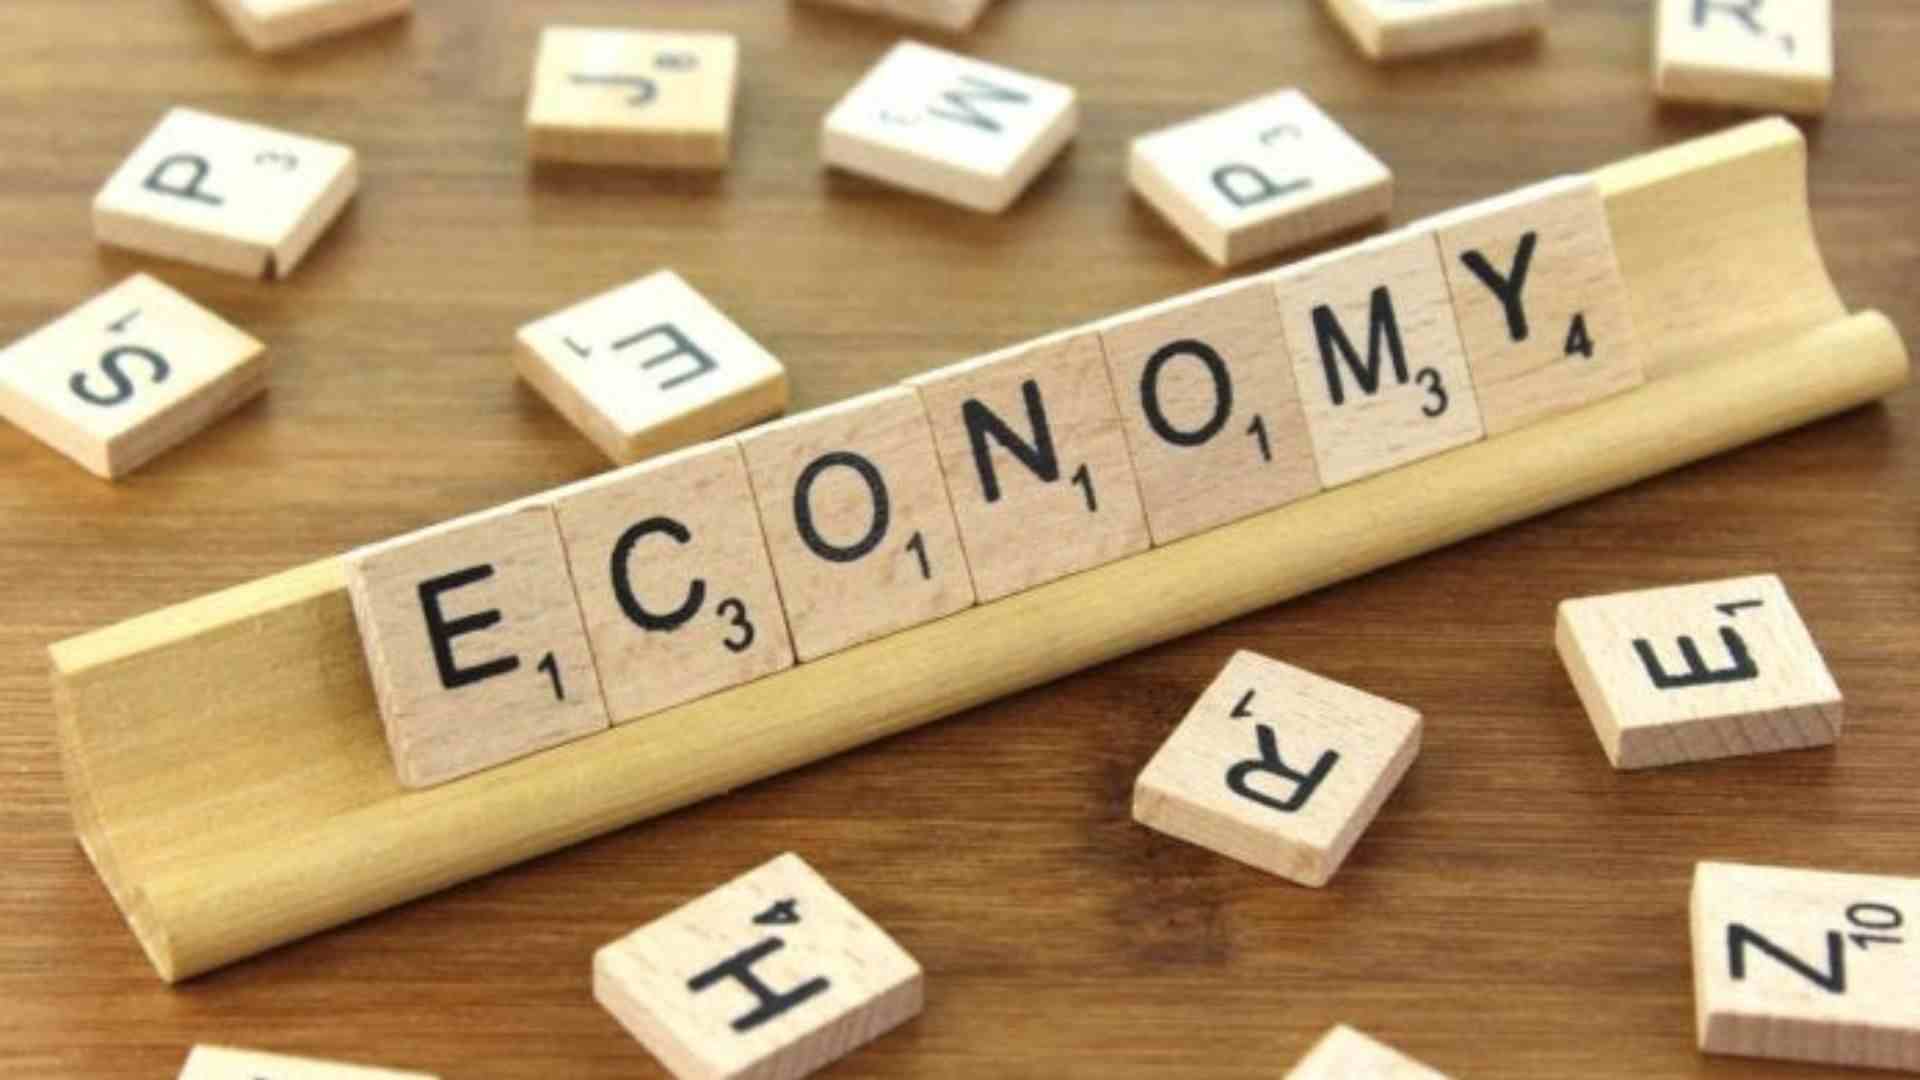 India Poised To Surpass Japan, Become 4th Largest Economy By 2025: Amitabh Kant